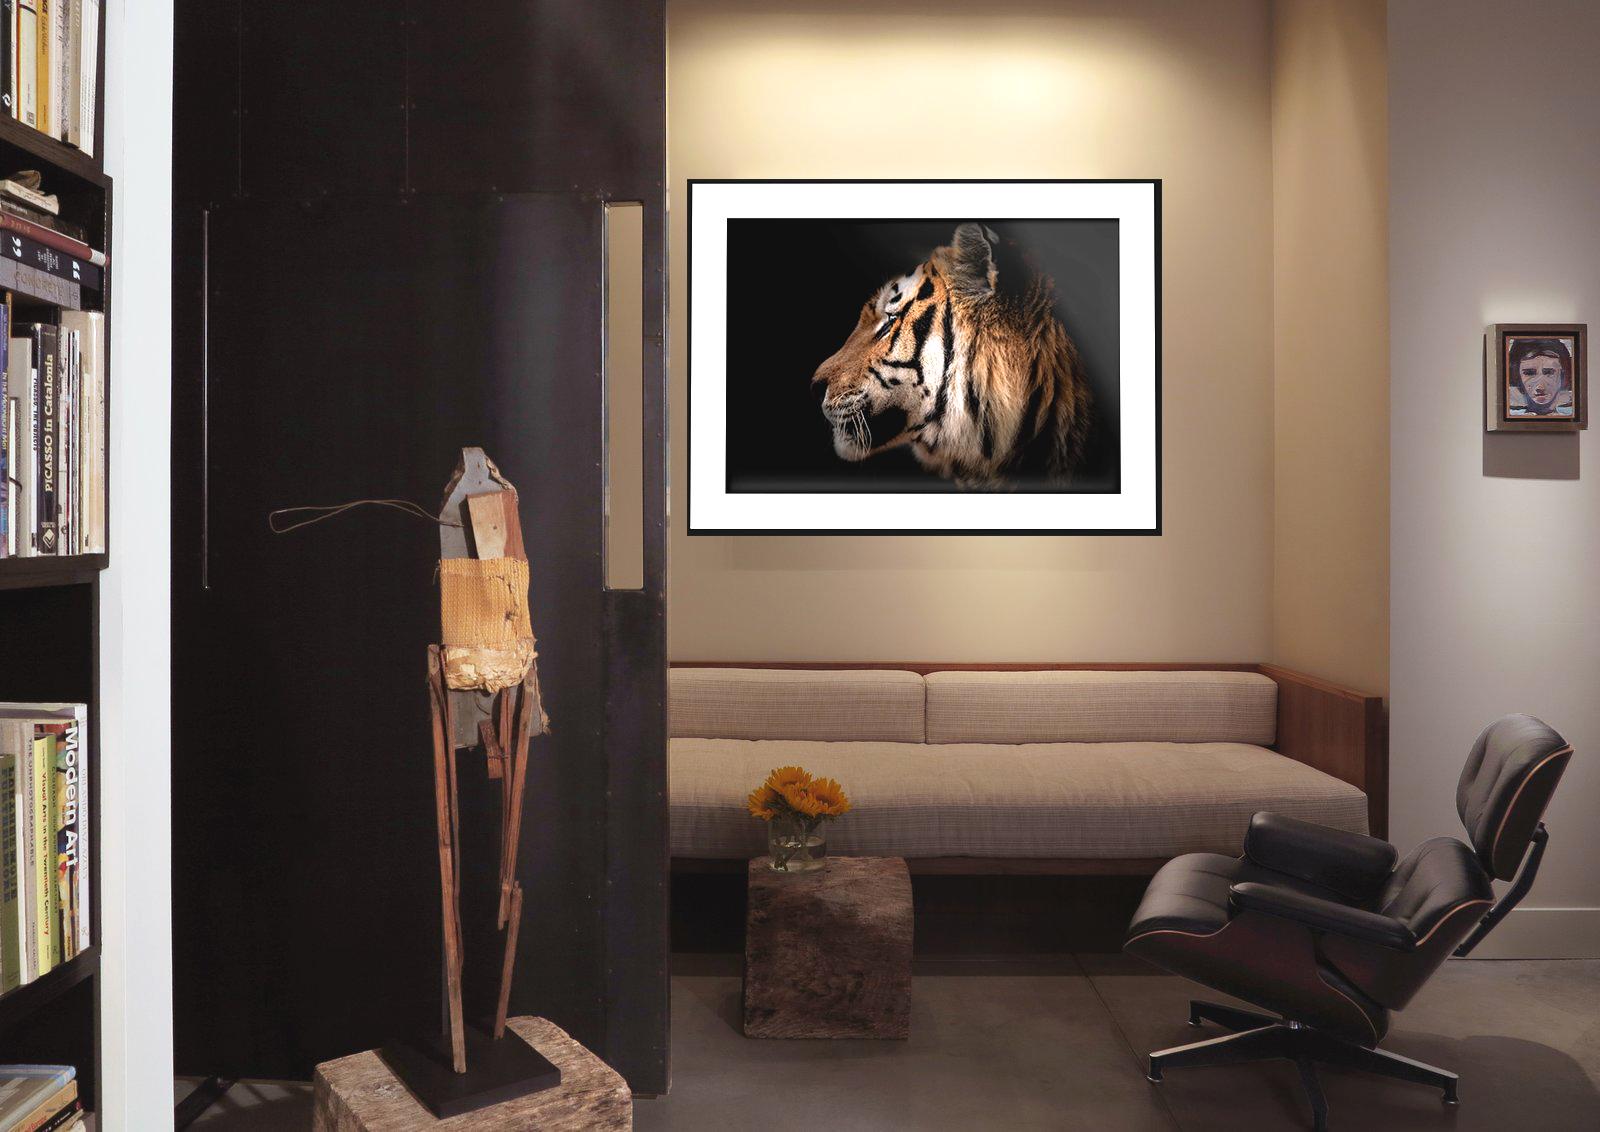 This is a contemporary fine art poster print of a Tiger by Shane Russeck. 
36x24 Edition of 150
Printed on archival paper using archival inks

Original offset lithograph poster printed on acid-free archival poster paper from the 2019